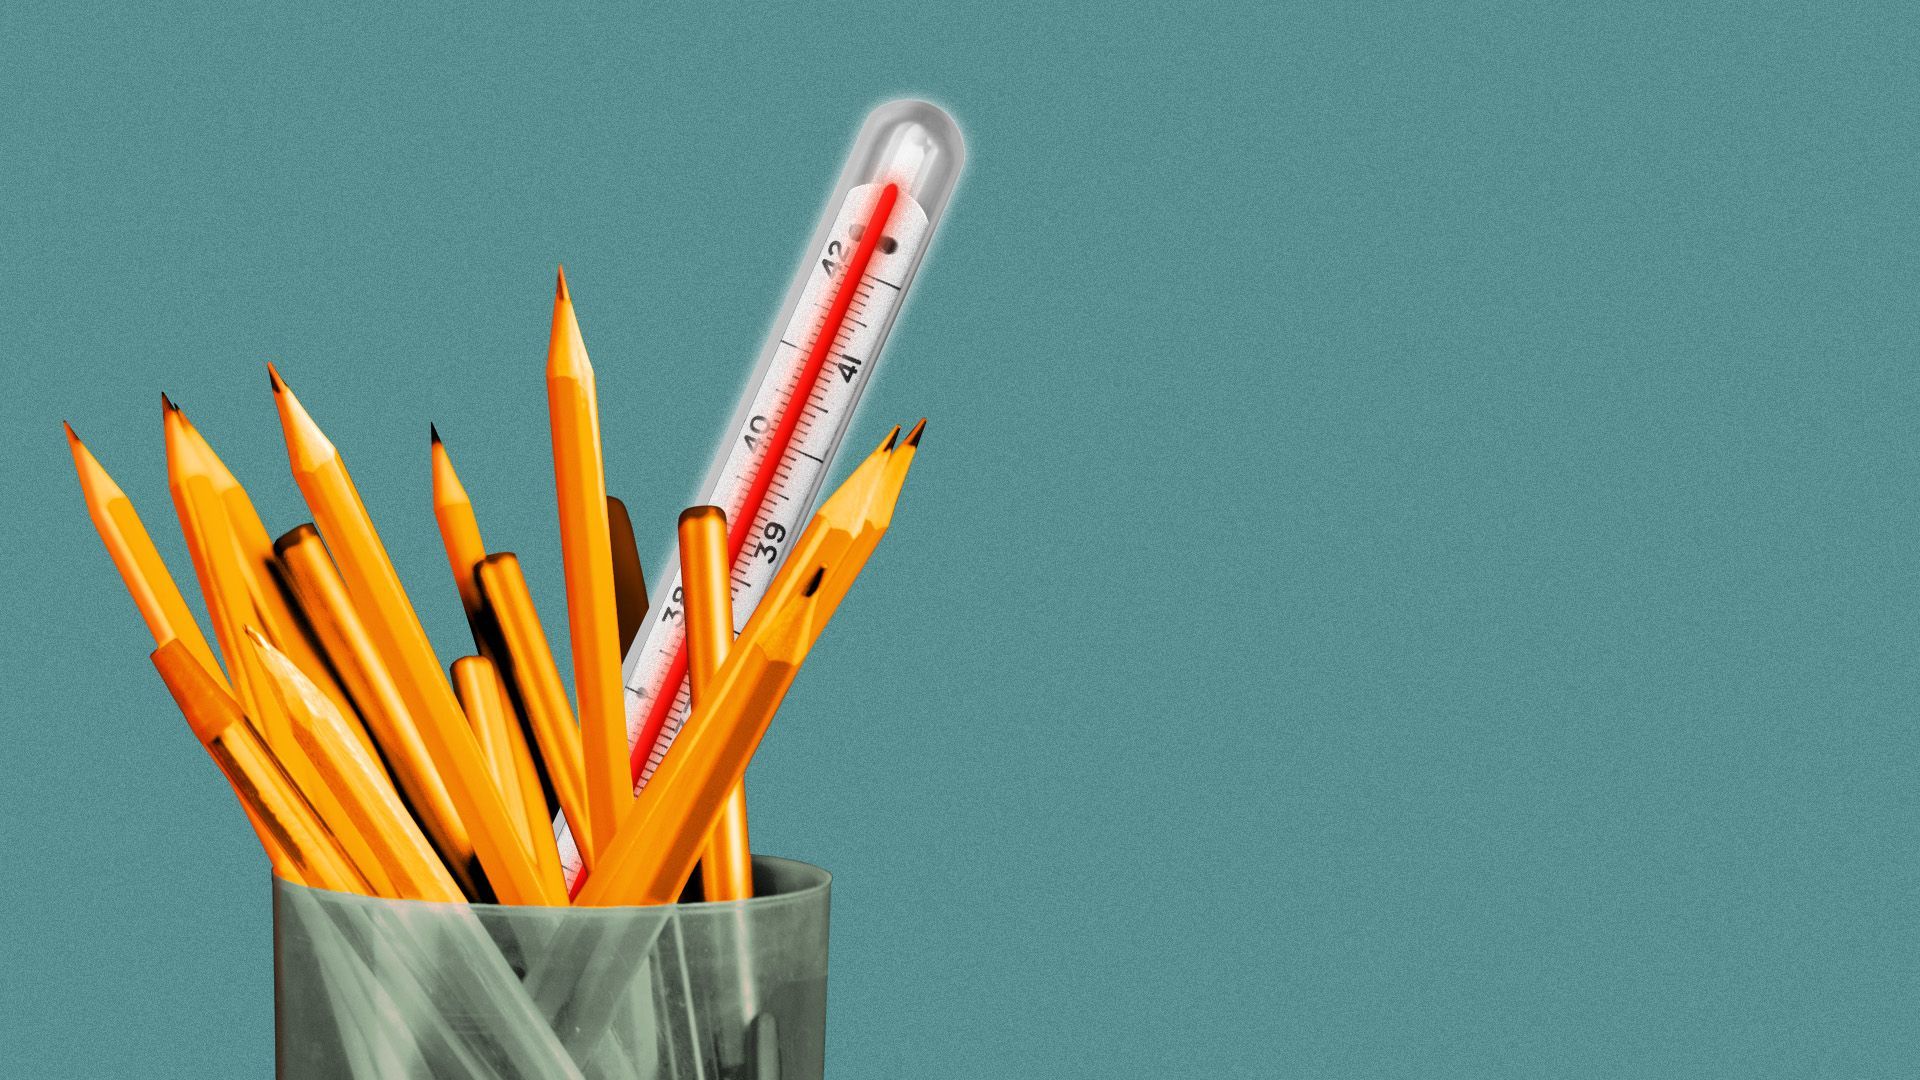 Illustration of a pencil cup filled with pens and pencils and a mercury thermometer